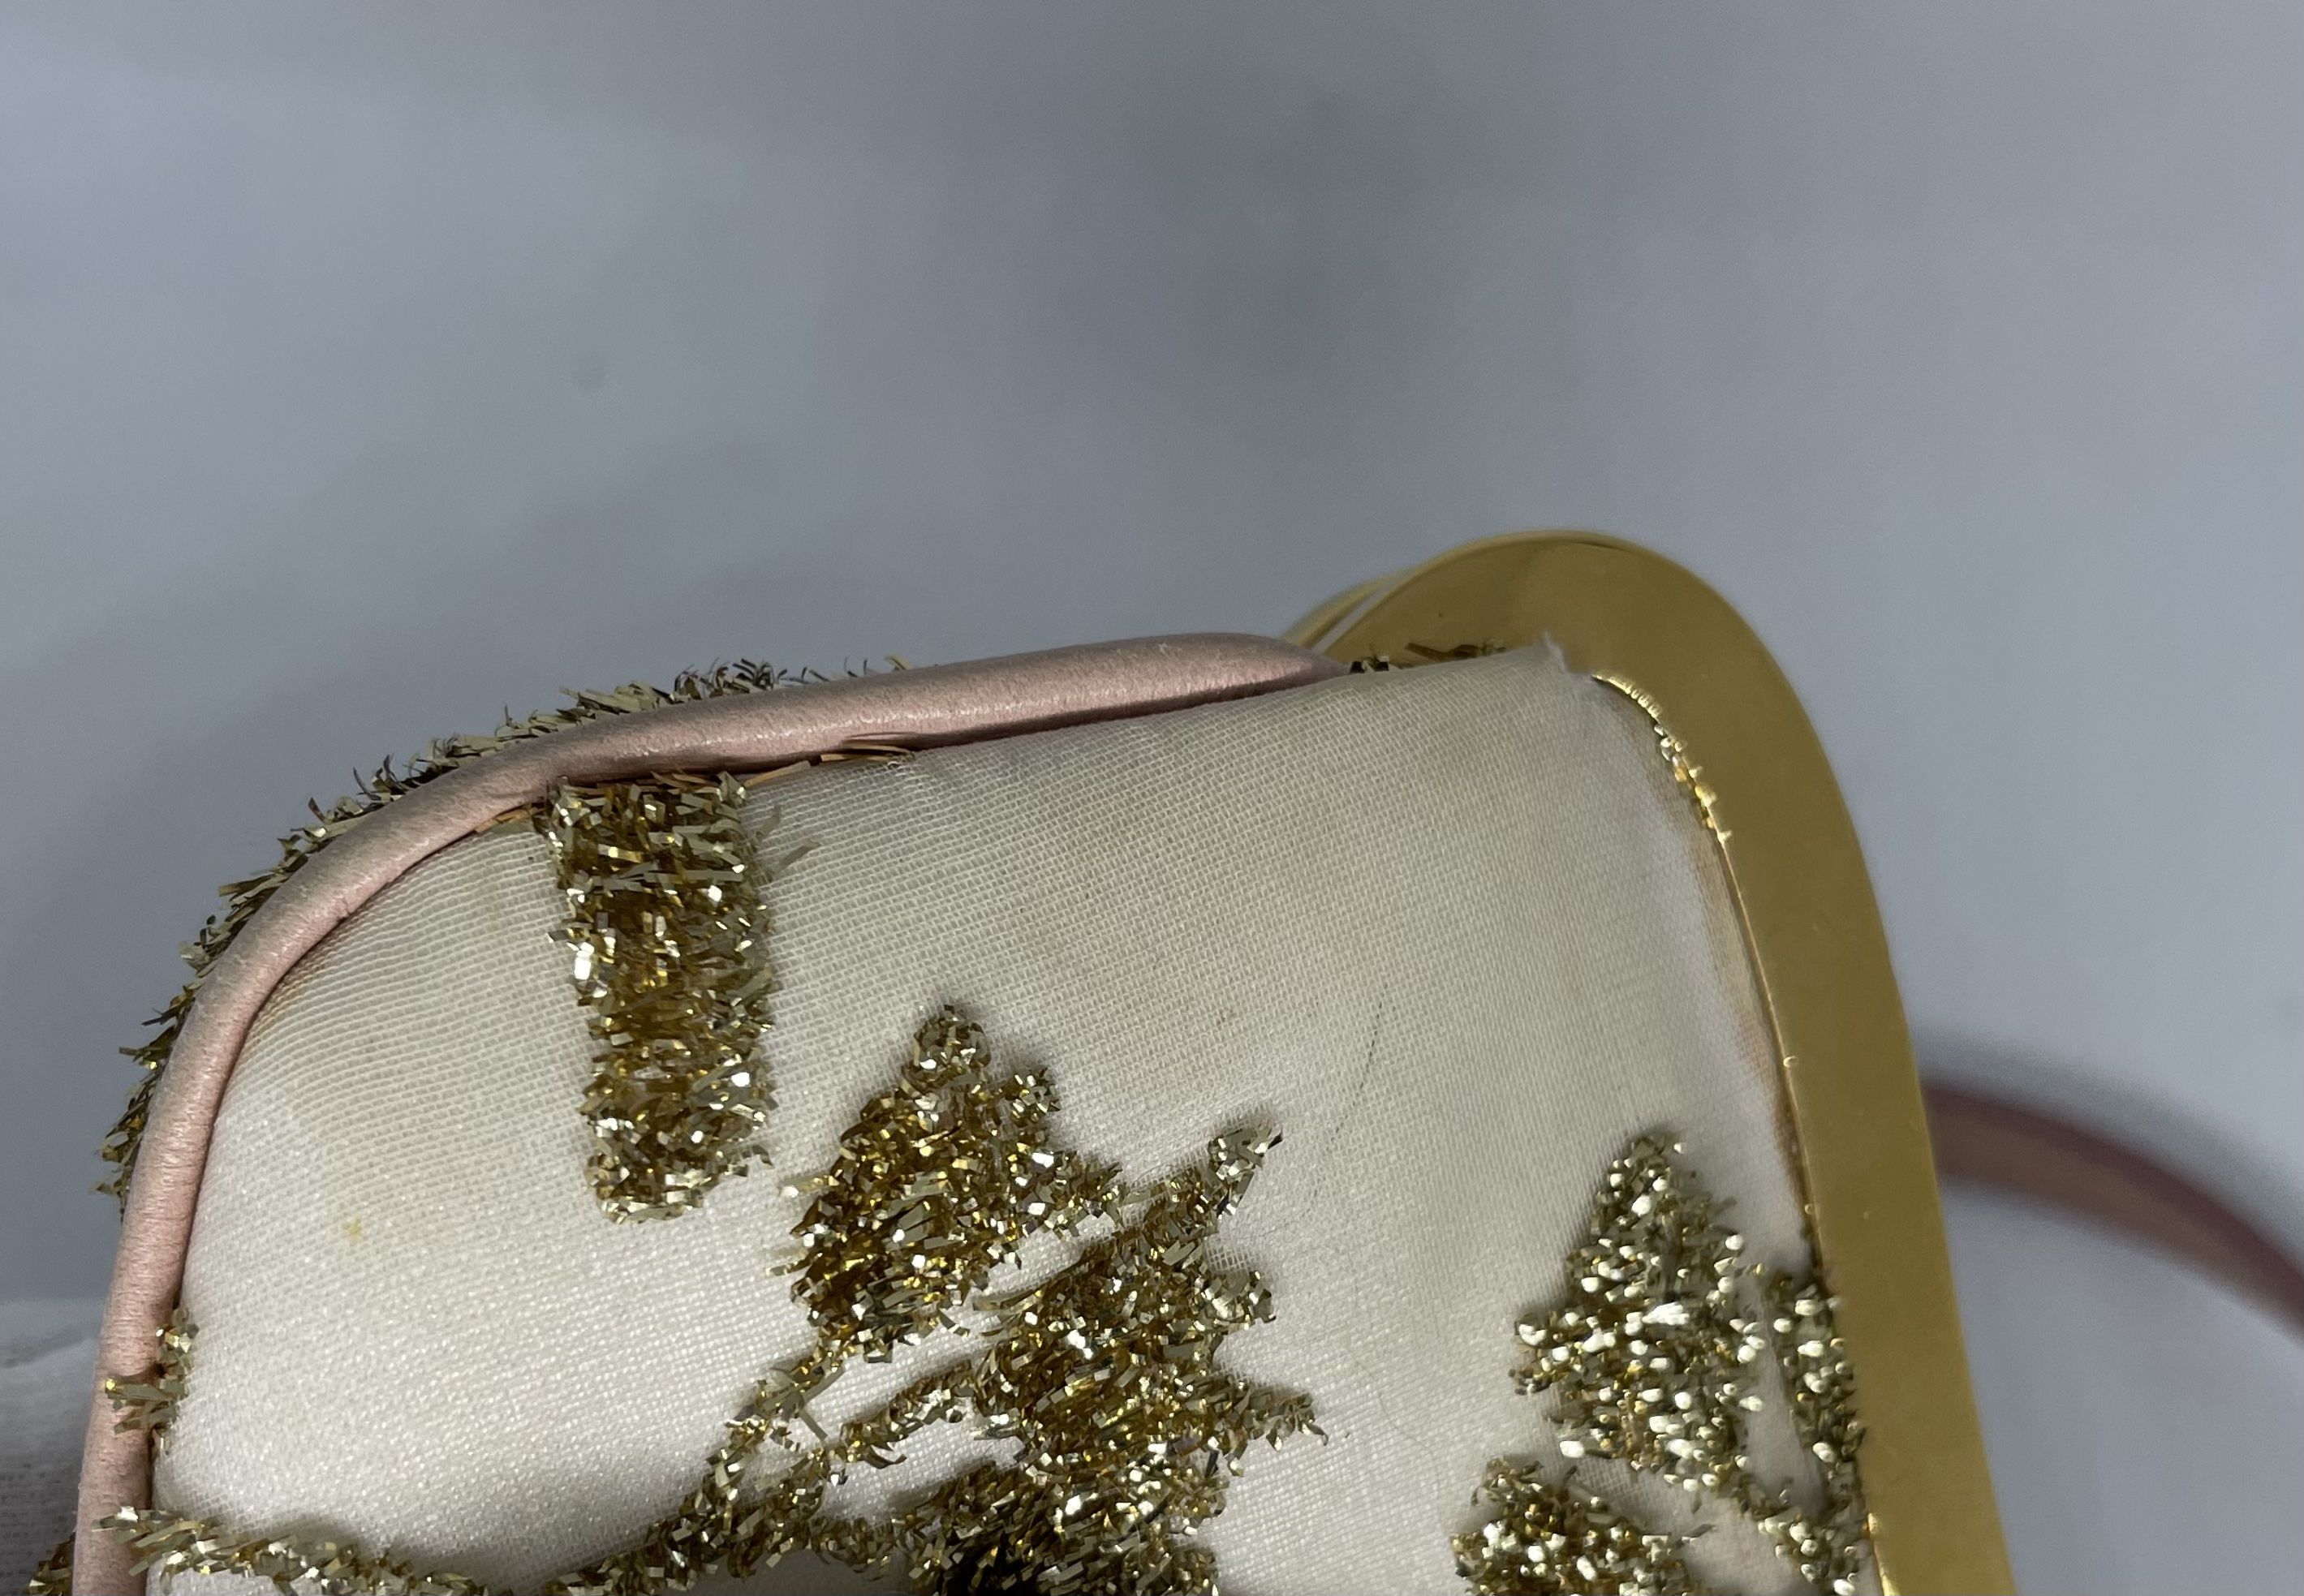 Dior Saddle MiniClutch Limited edition in gold coloured embroidery over cream satin - Image 11 of 14